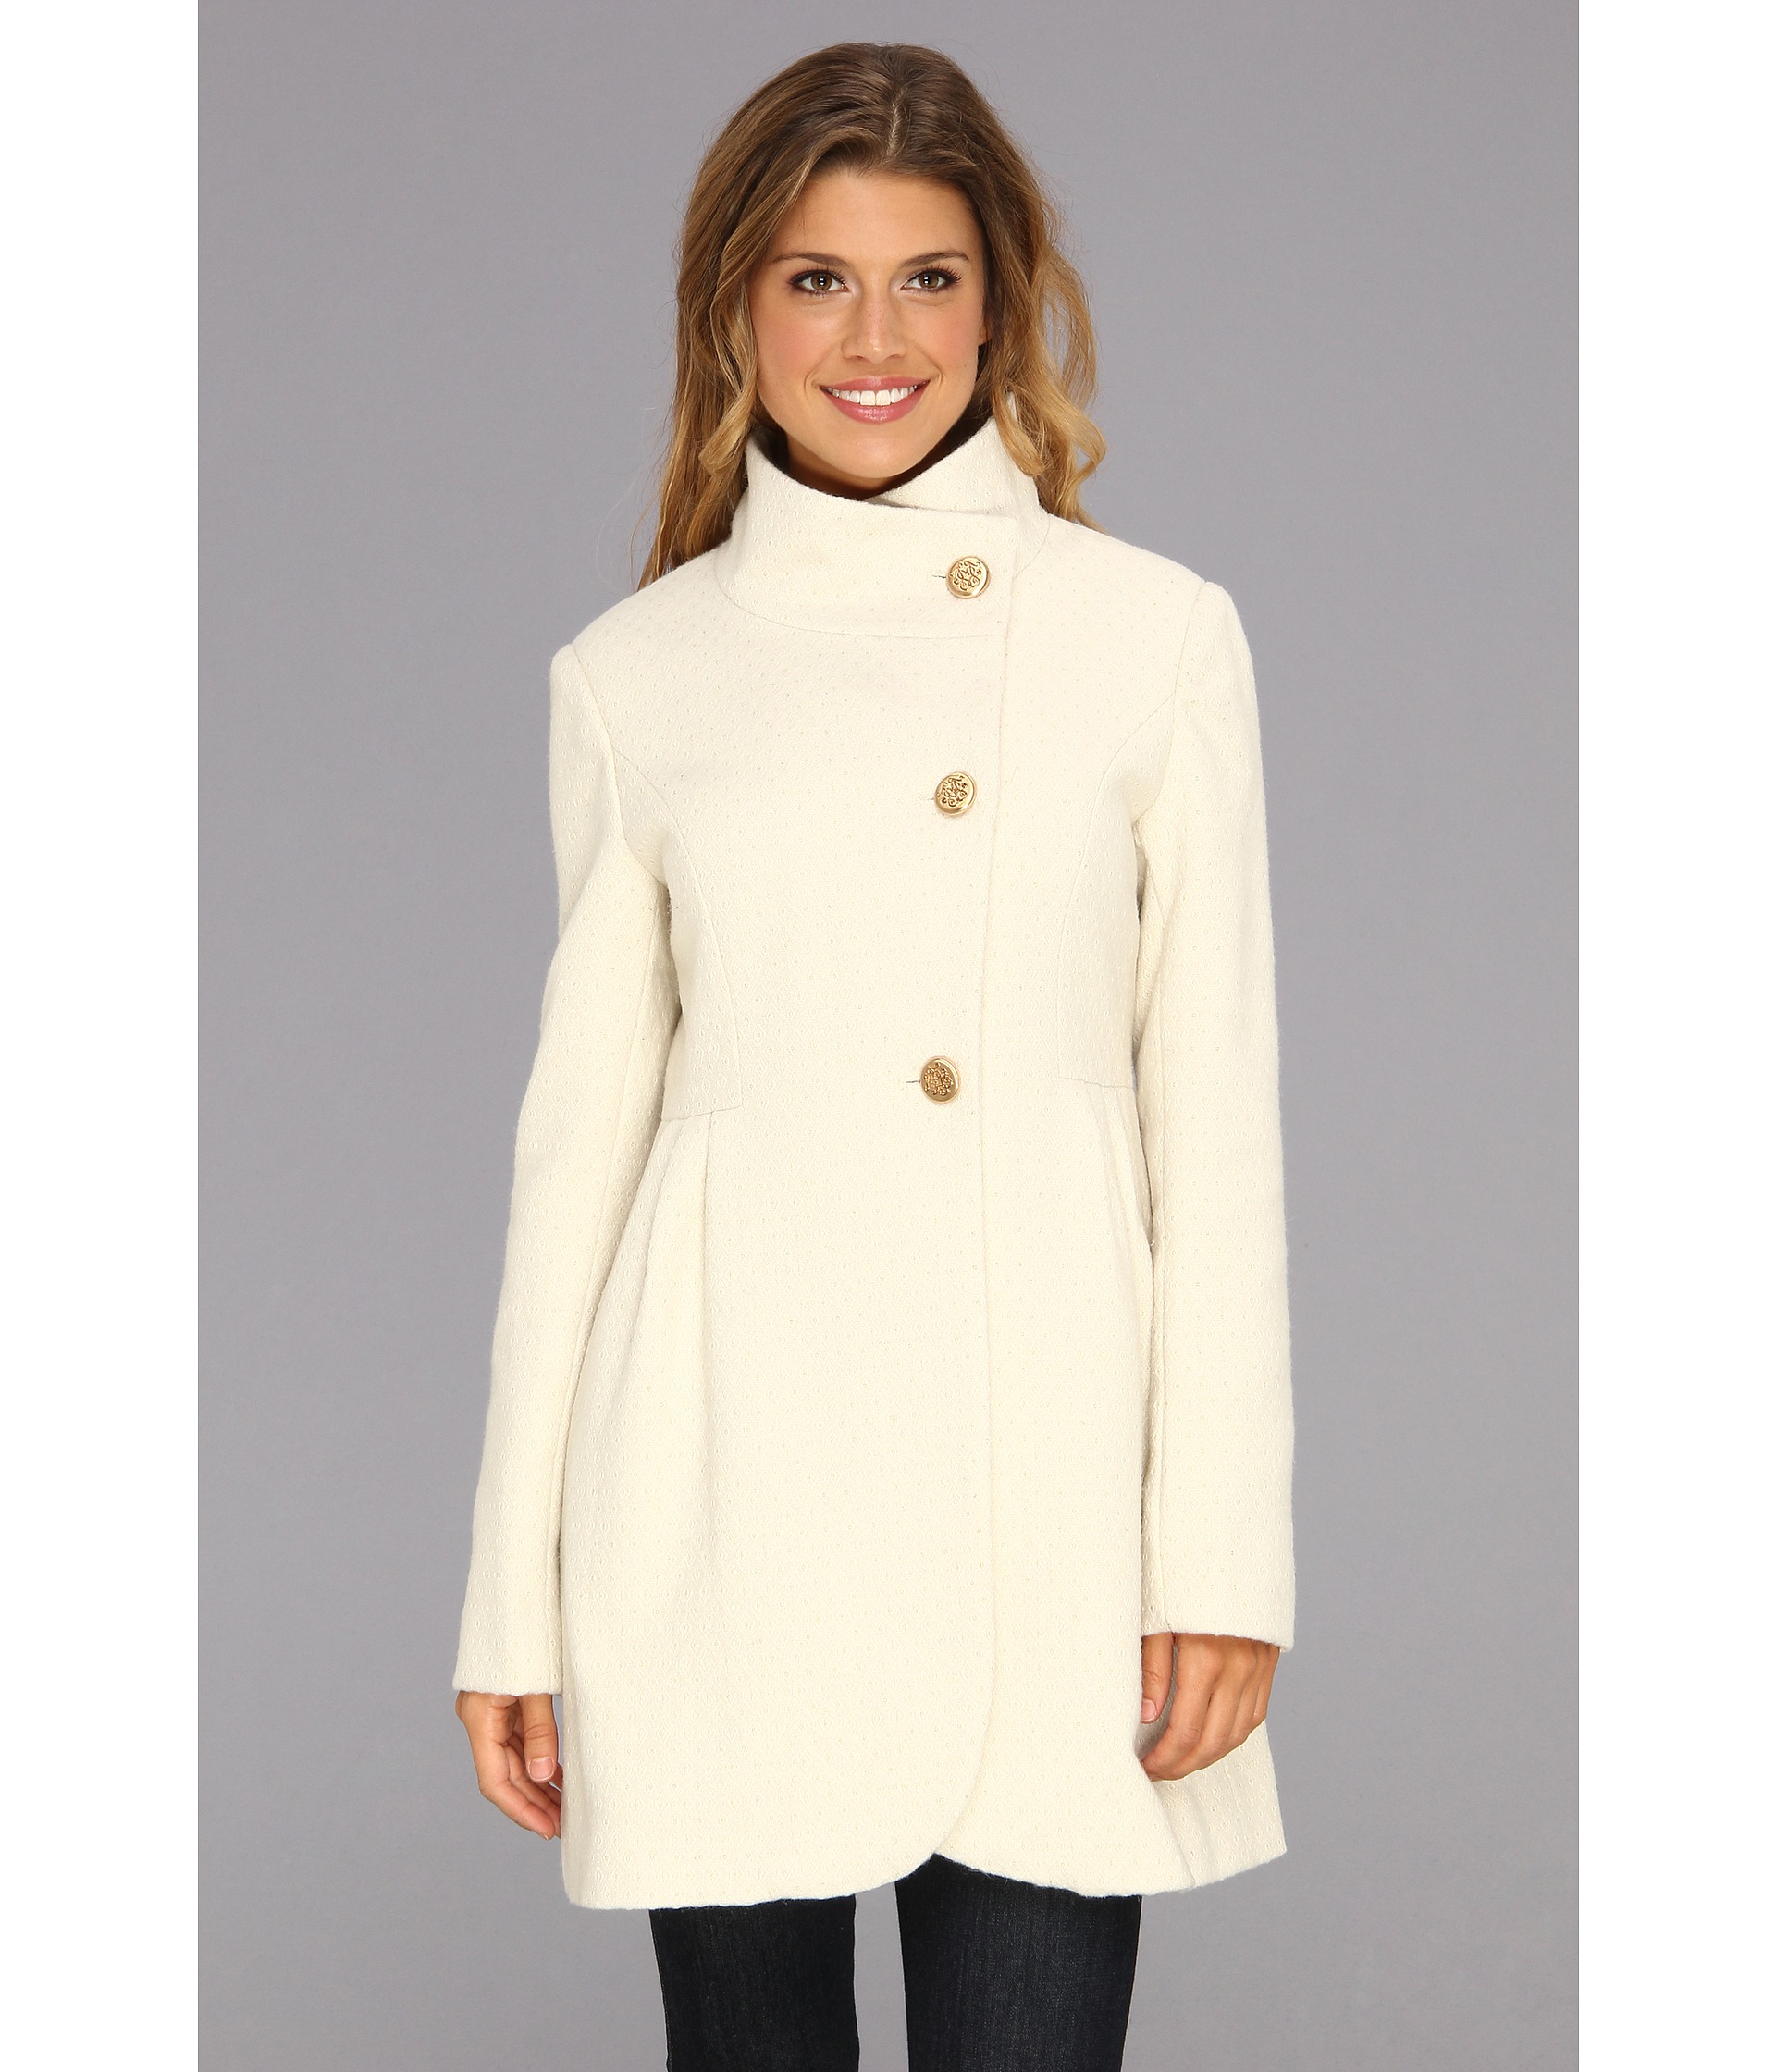 Jessica Simpson Jacquard Wool Coat Off White | Shipped Free at Zappos